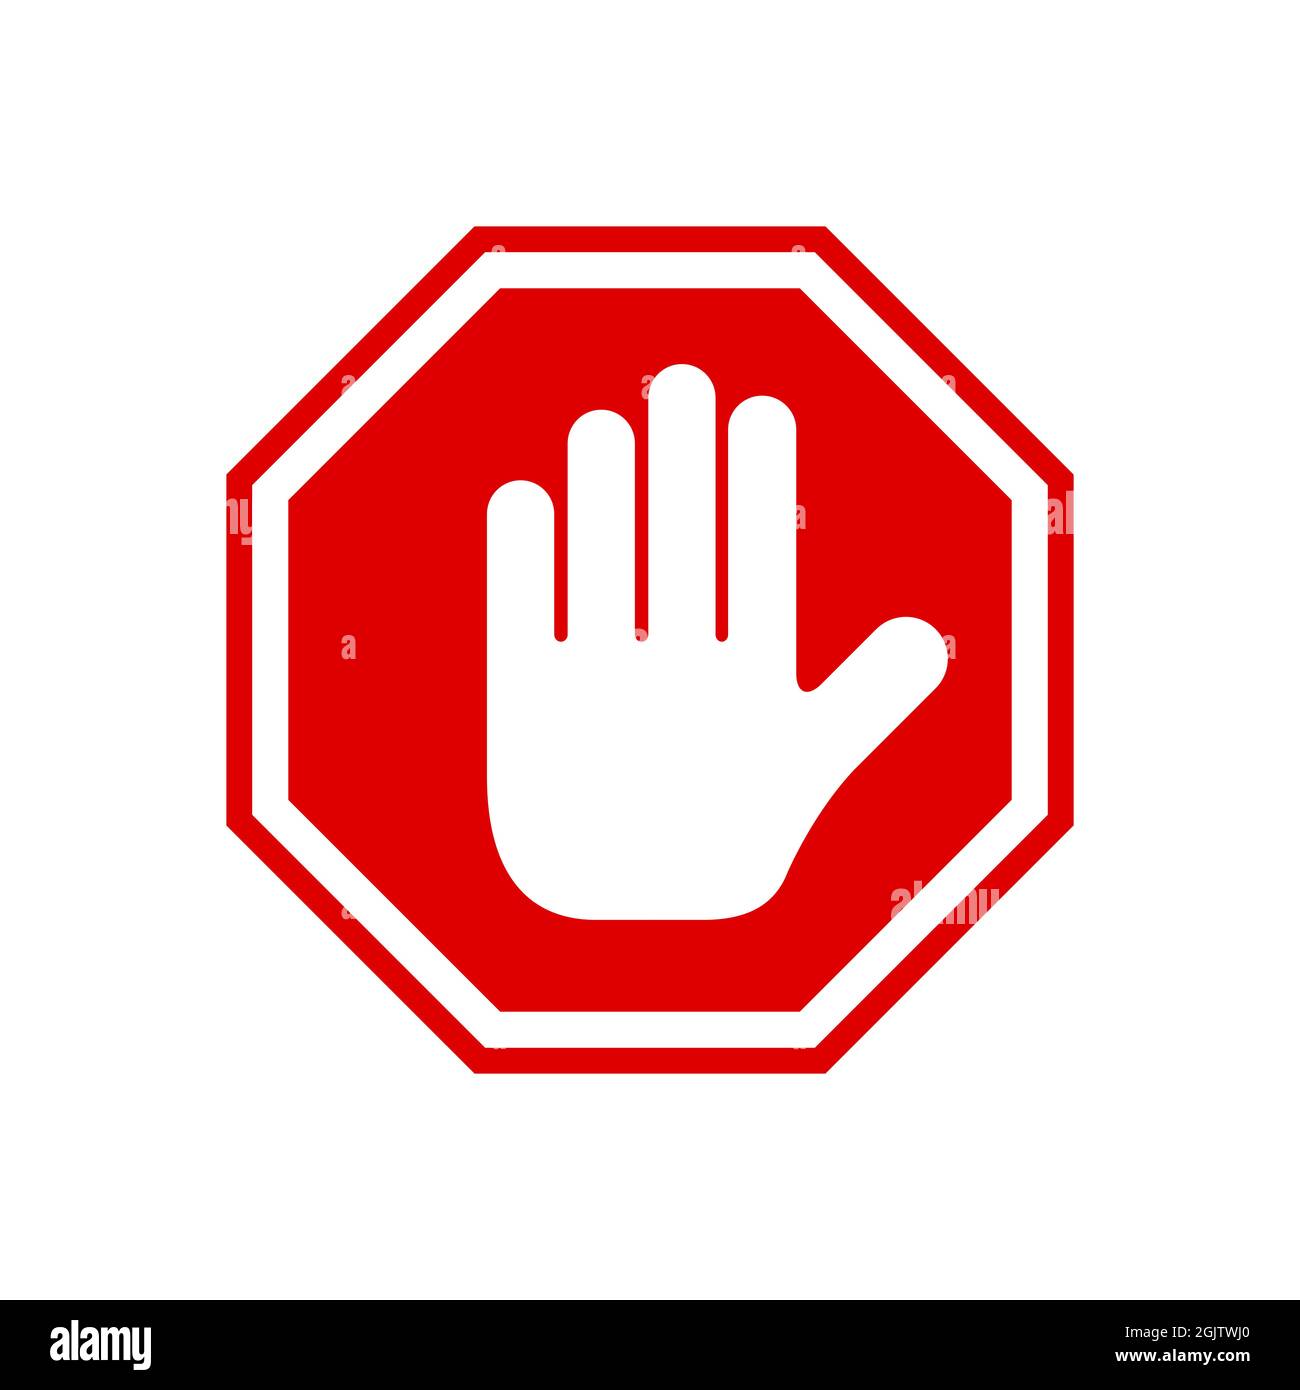 Red stop roadsign with simple hand symbol icon. No symbol isolated on white. Stop hand icon. illustration. Stock Photo